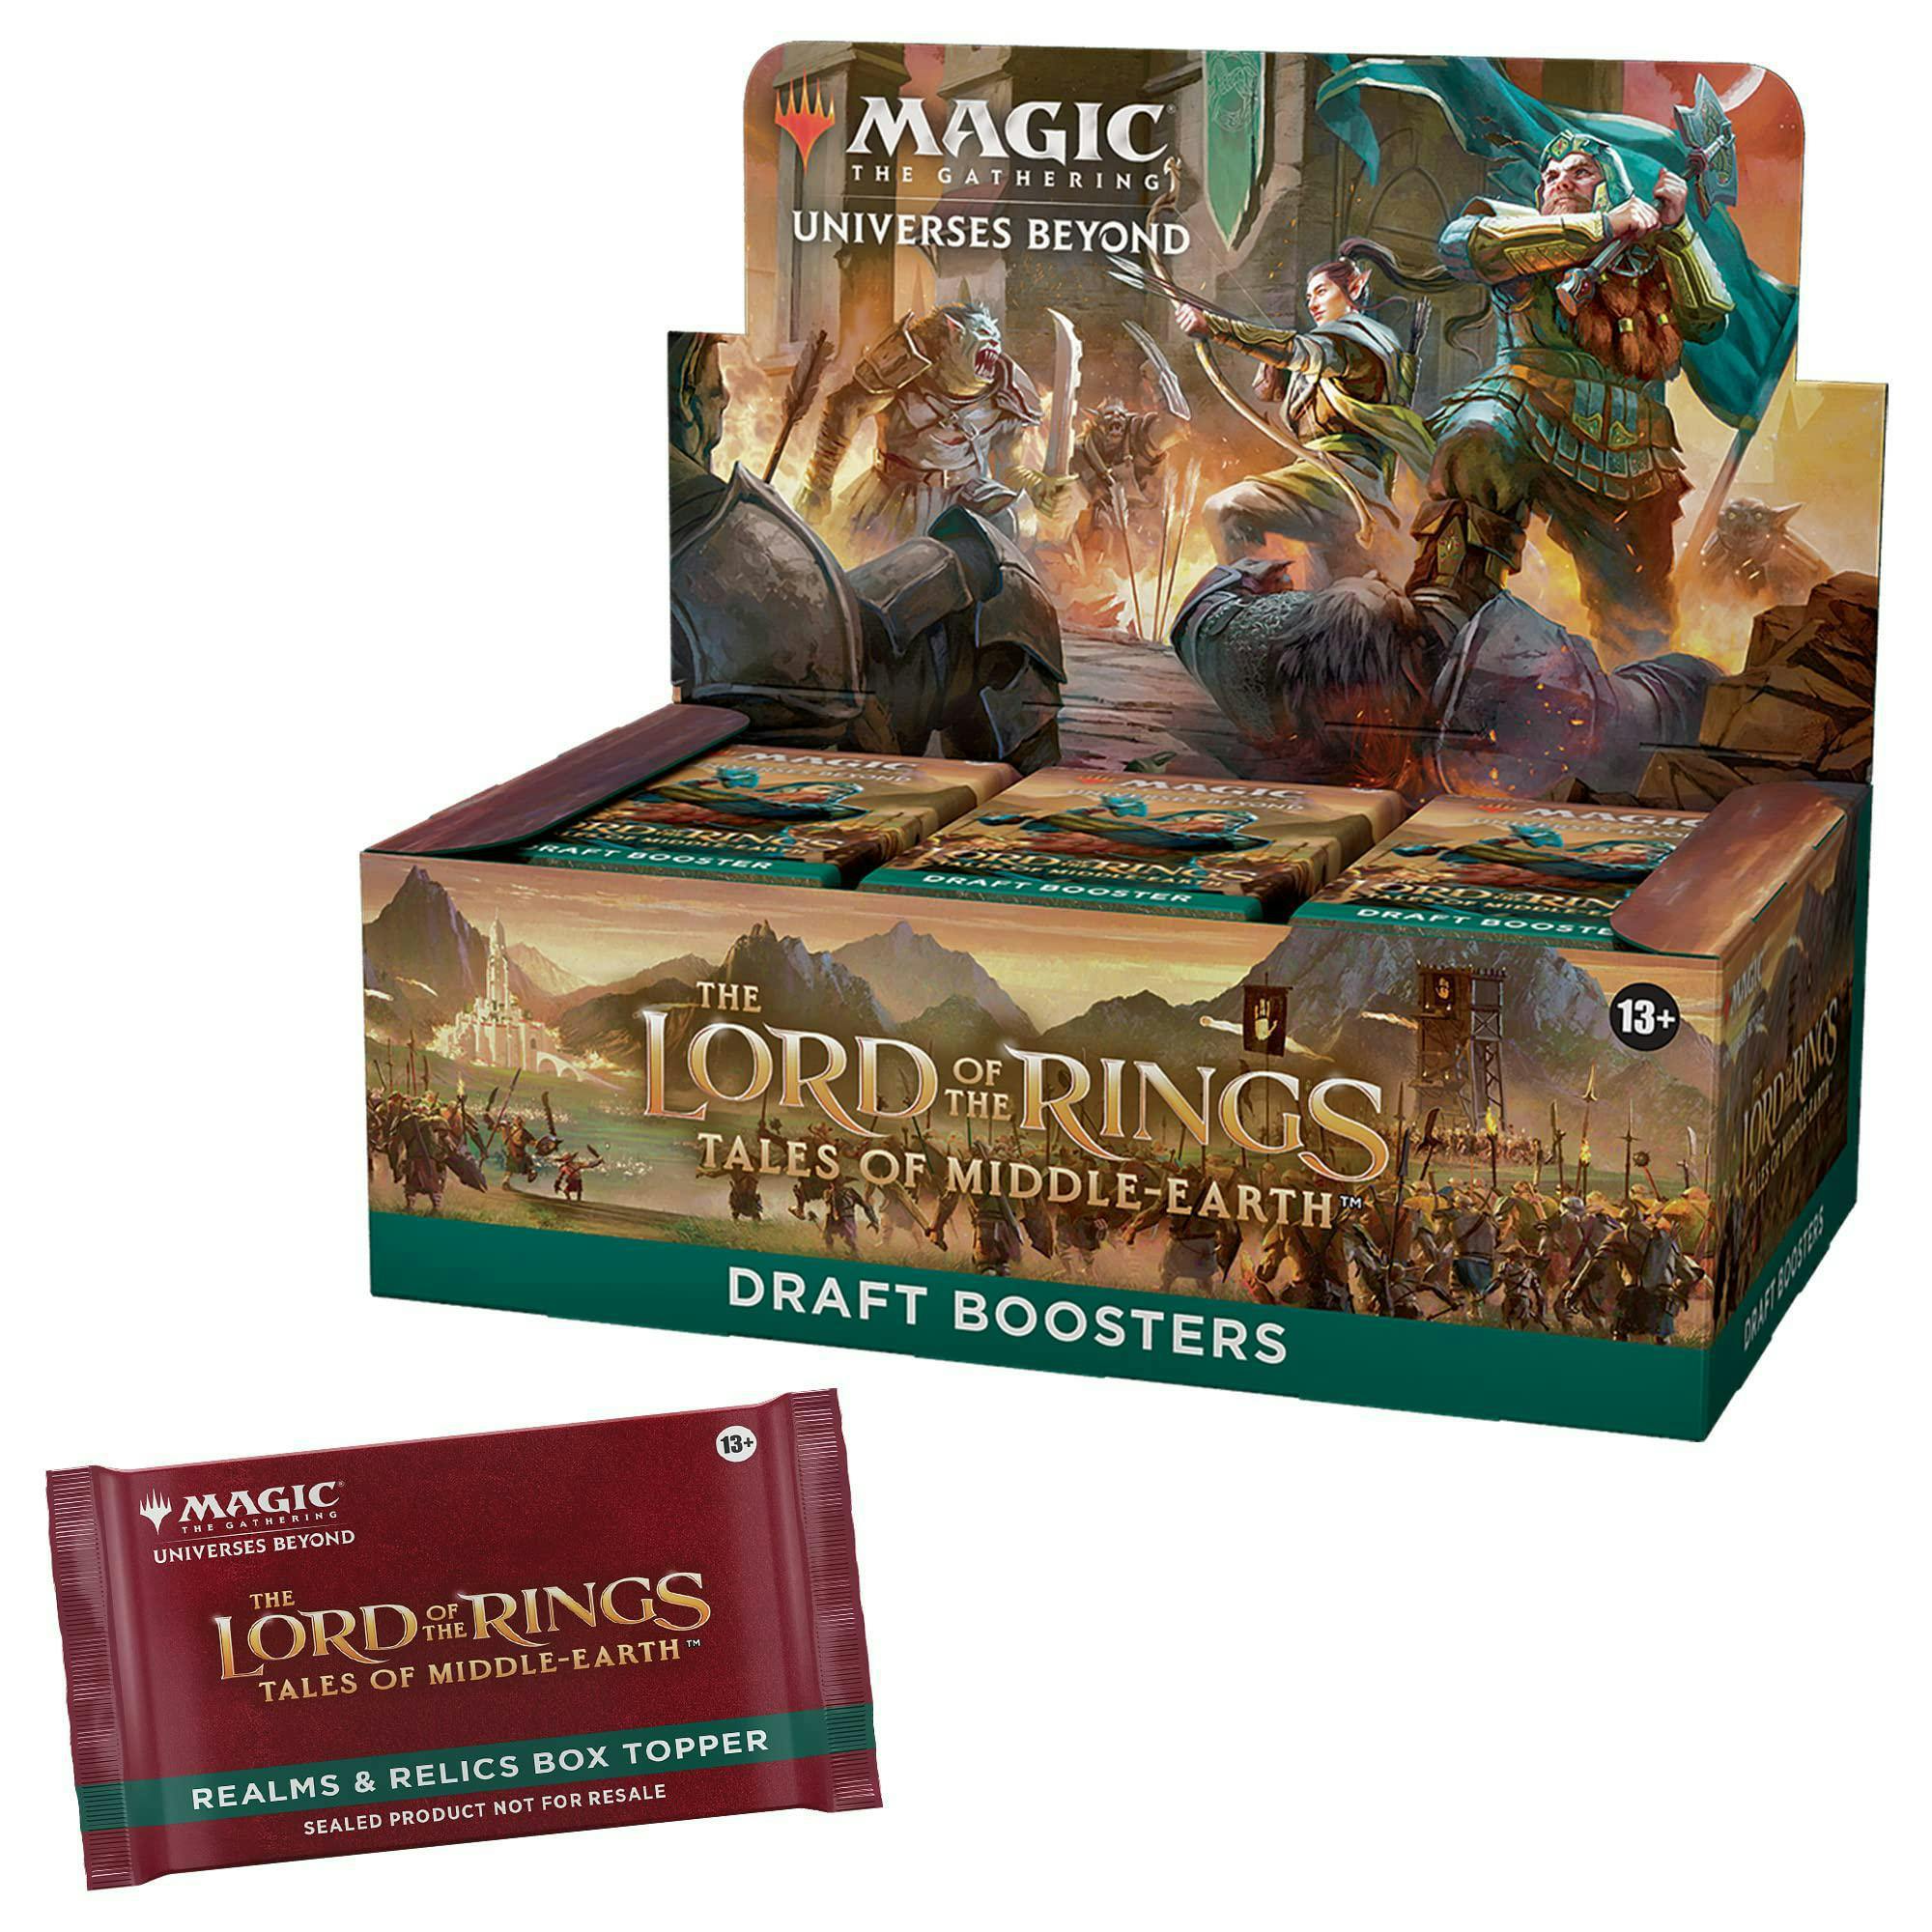 LotR Tales of Middle-Earth Draft Booster